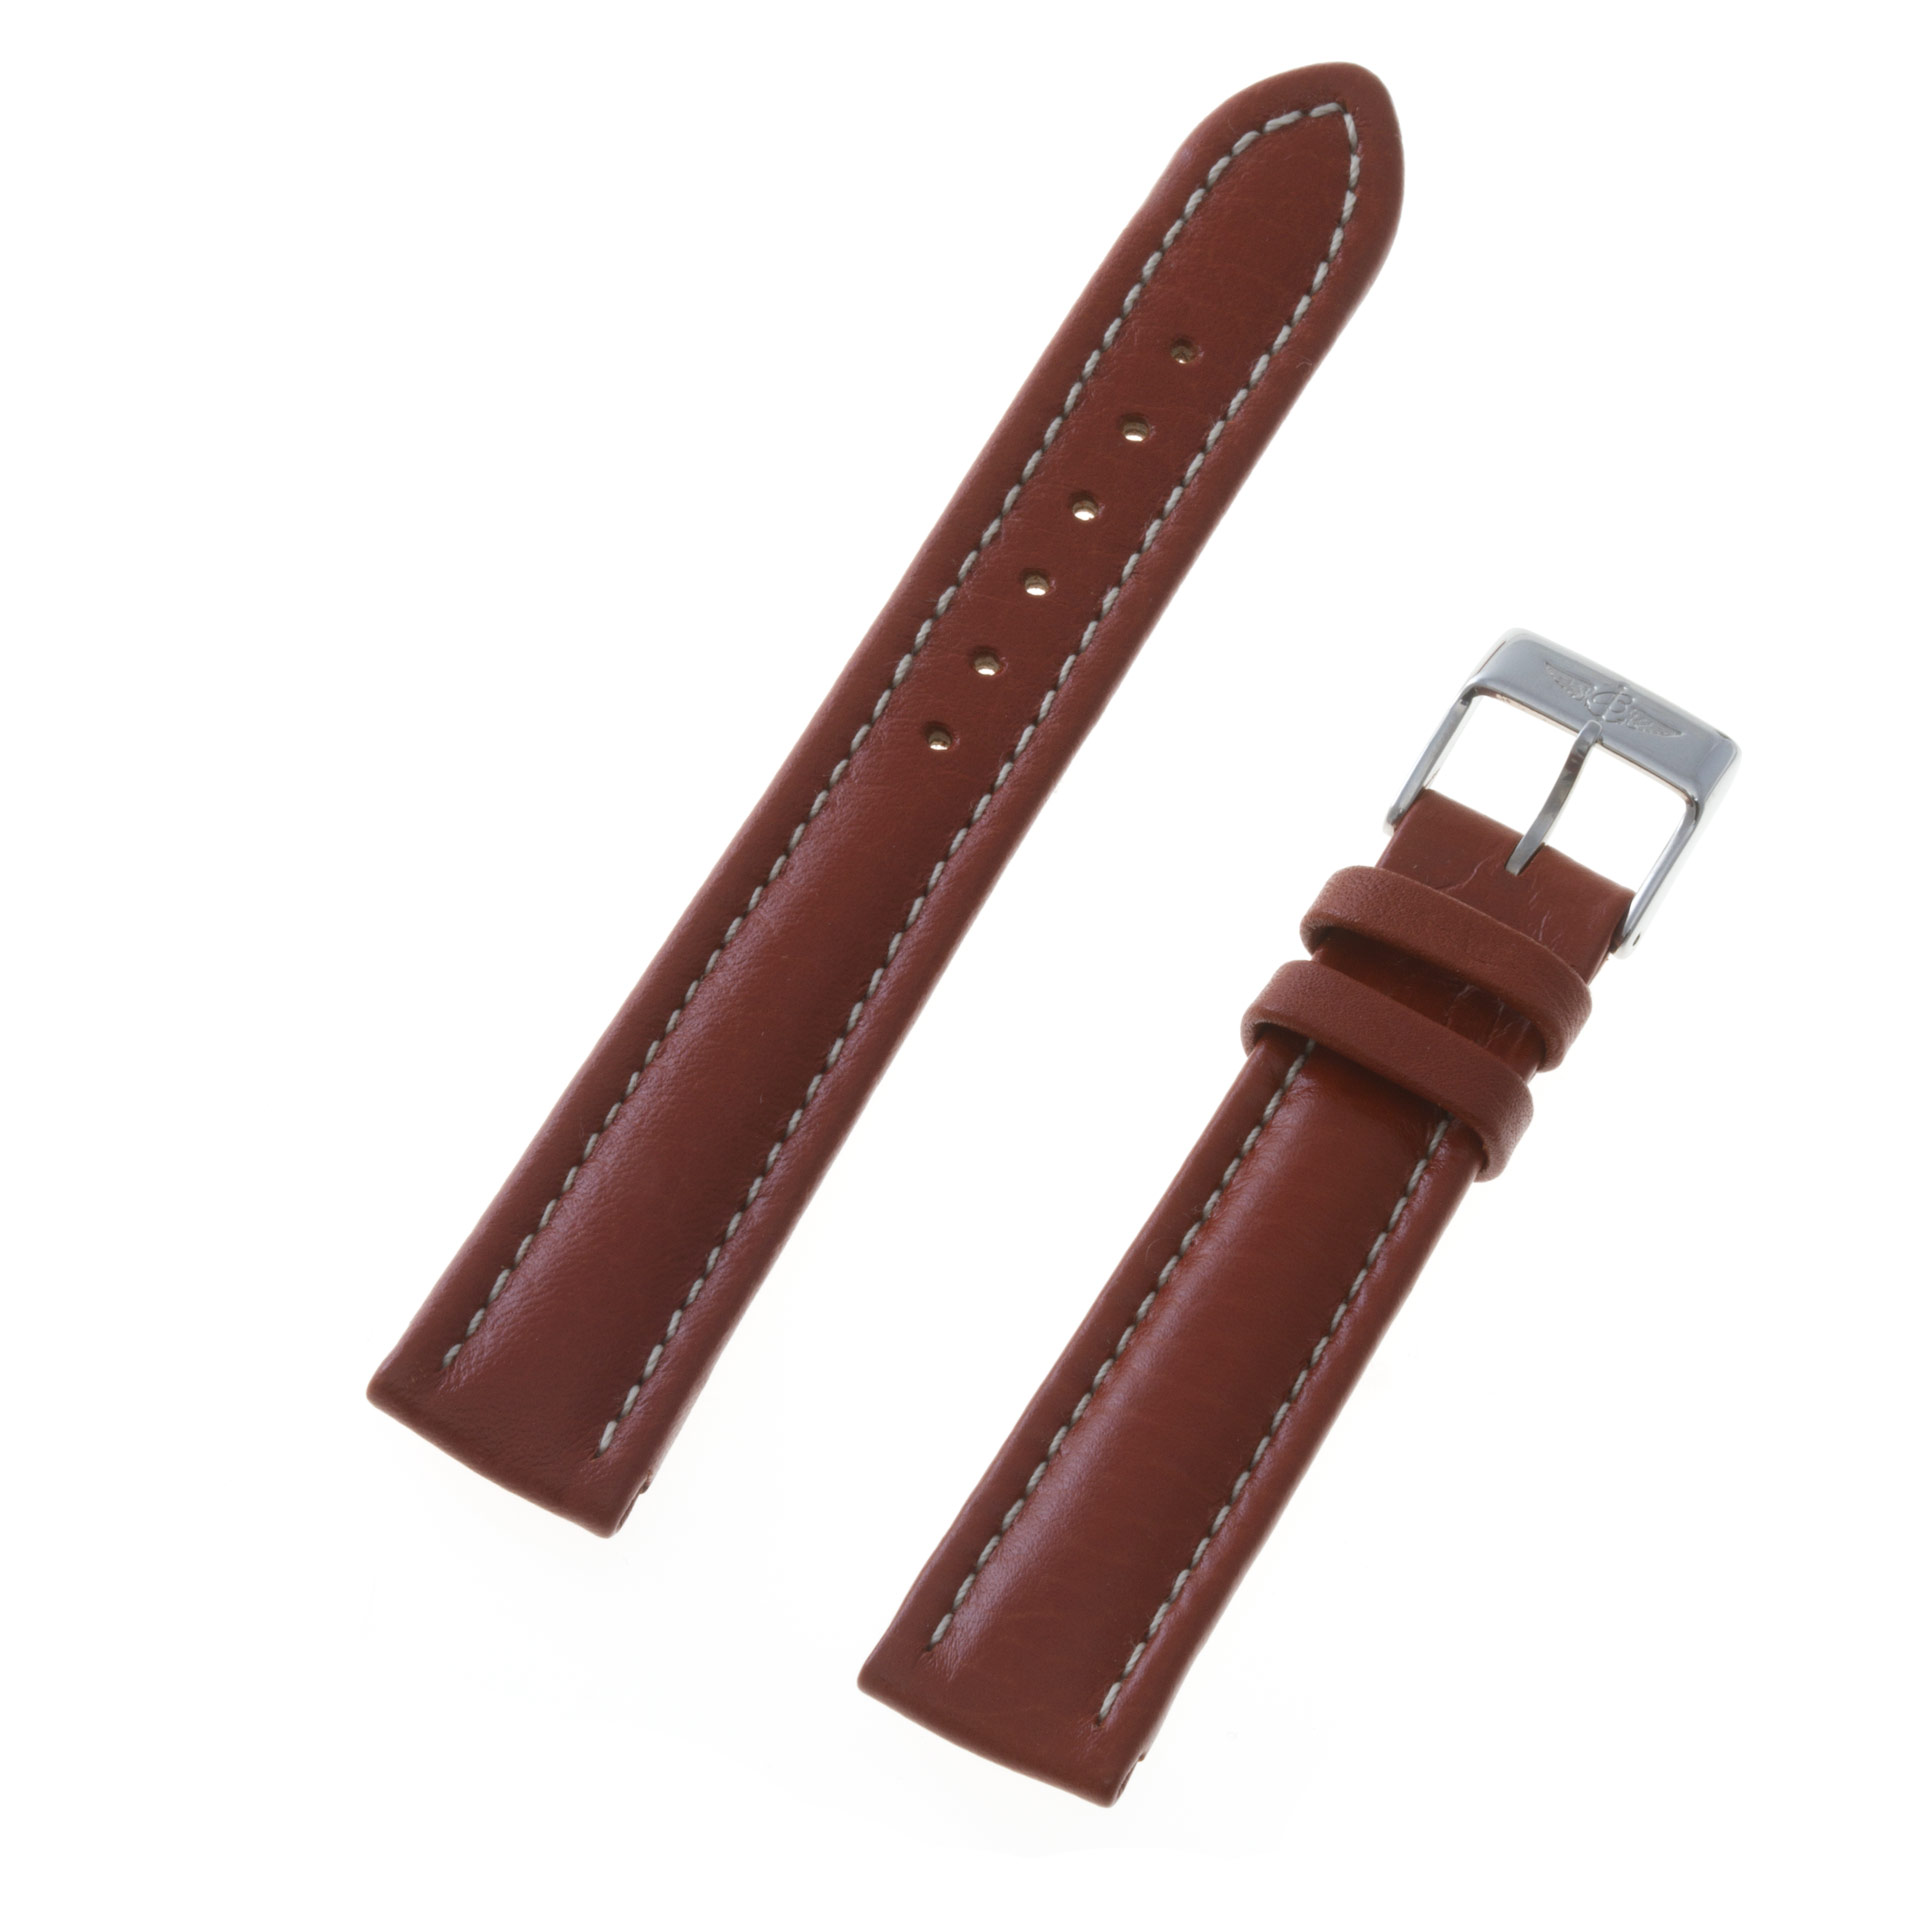 Breitling tan leather strap with white stitching and original tang buckle (18x16)